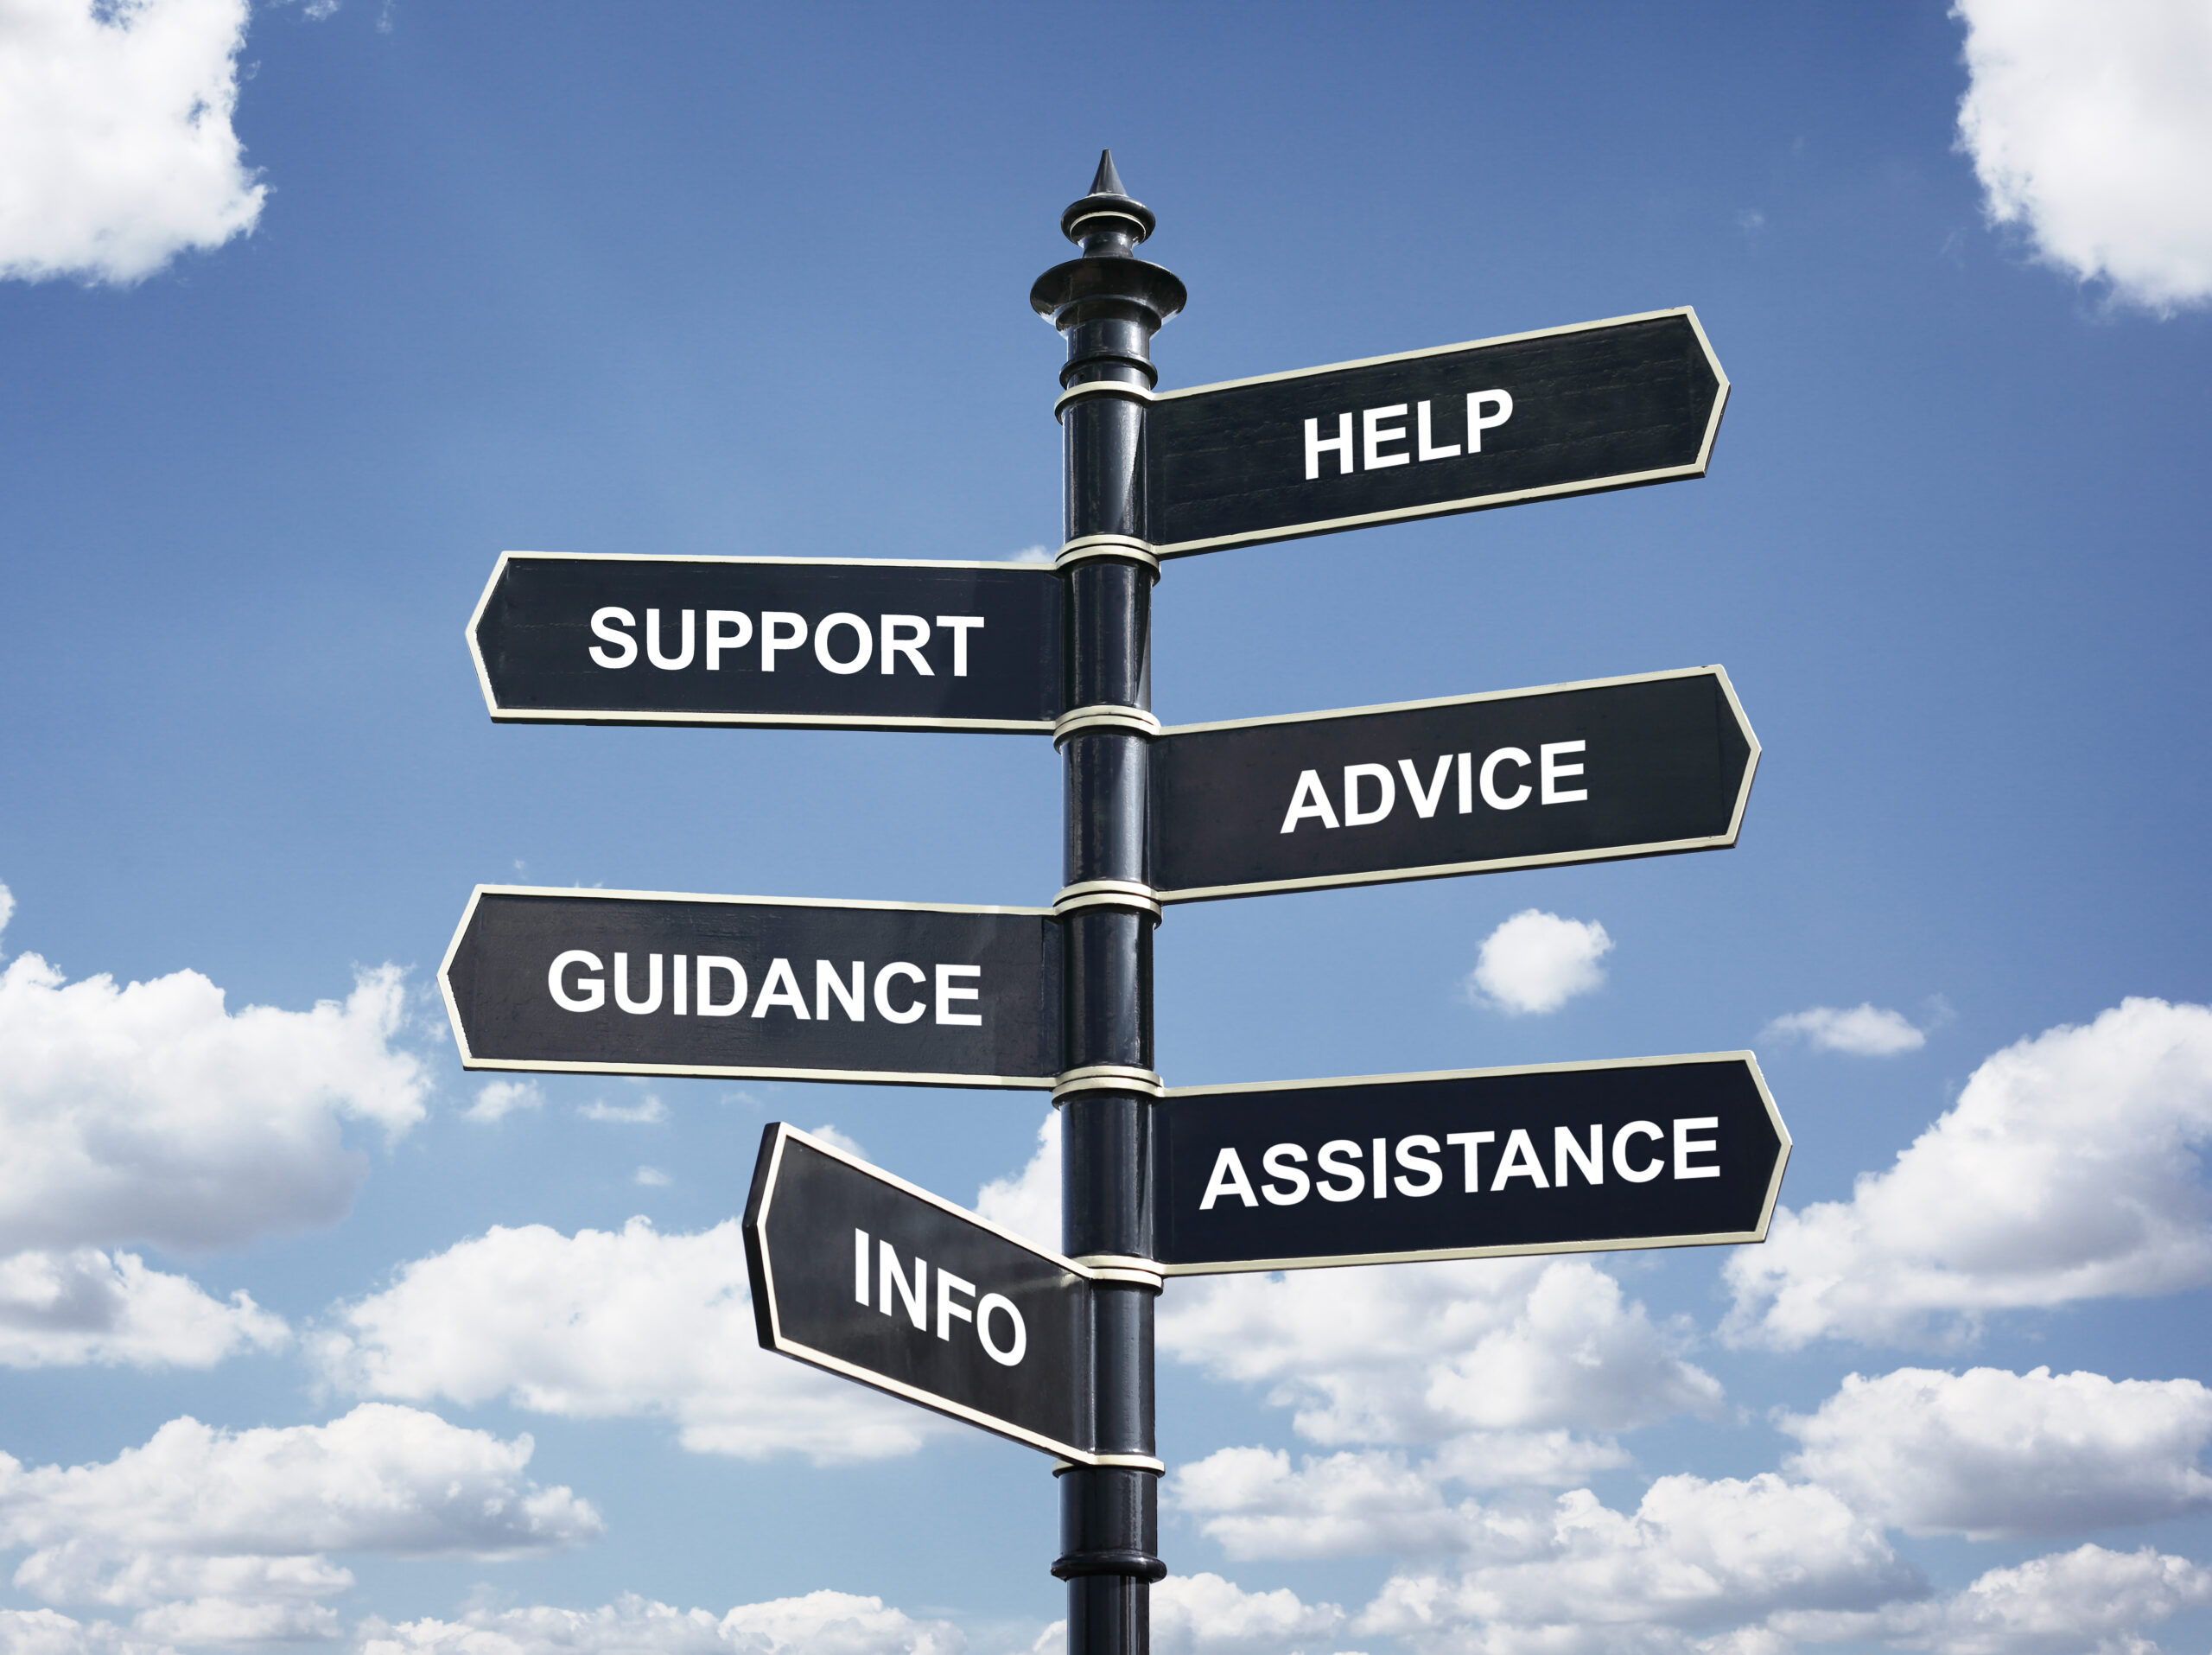 Help,,Support,,Advice,,Guidance,,Assistance,And,Info,Crossroad,Signpost,Business